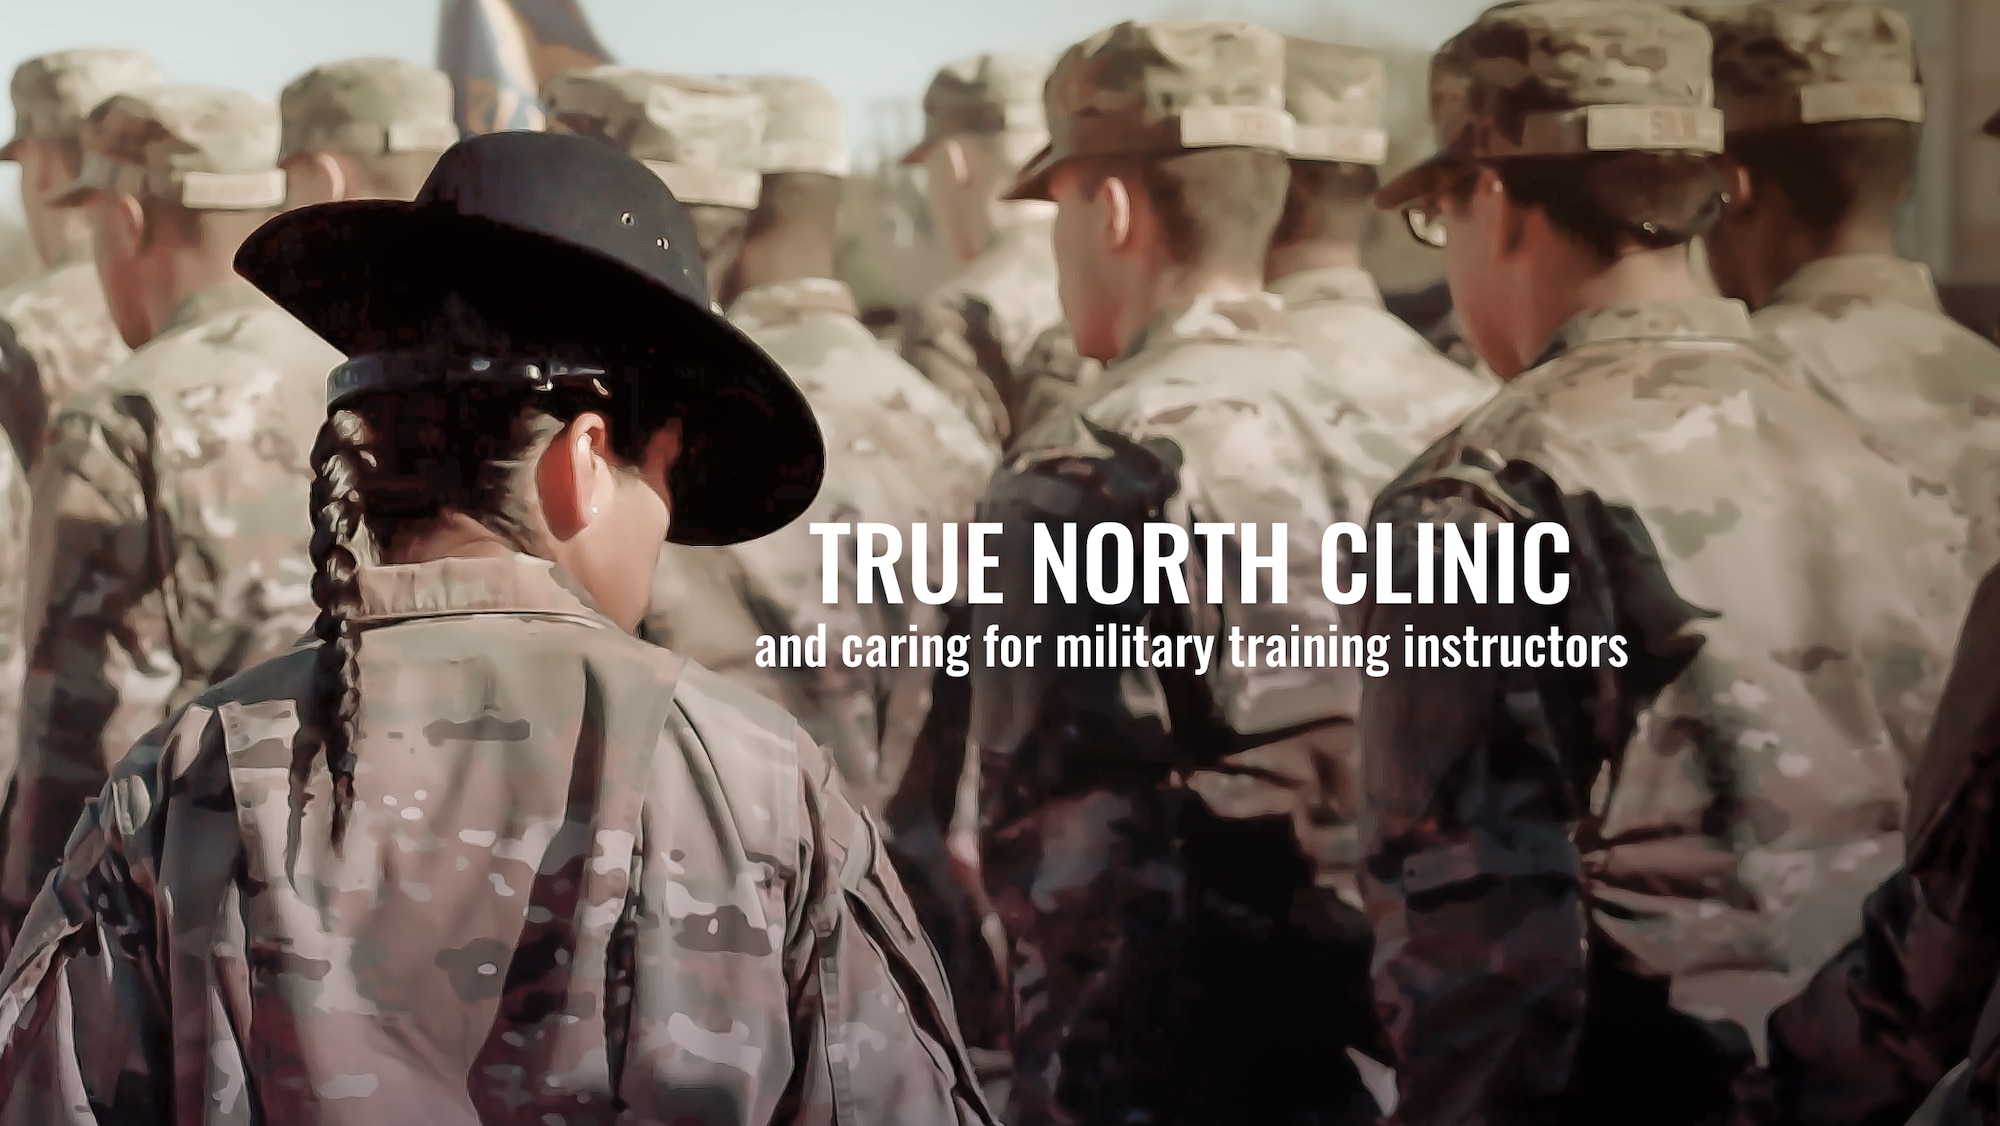 True North clinic and caring for military training instructors